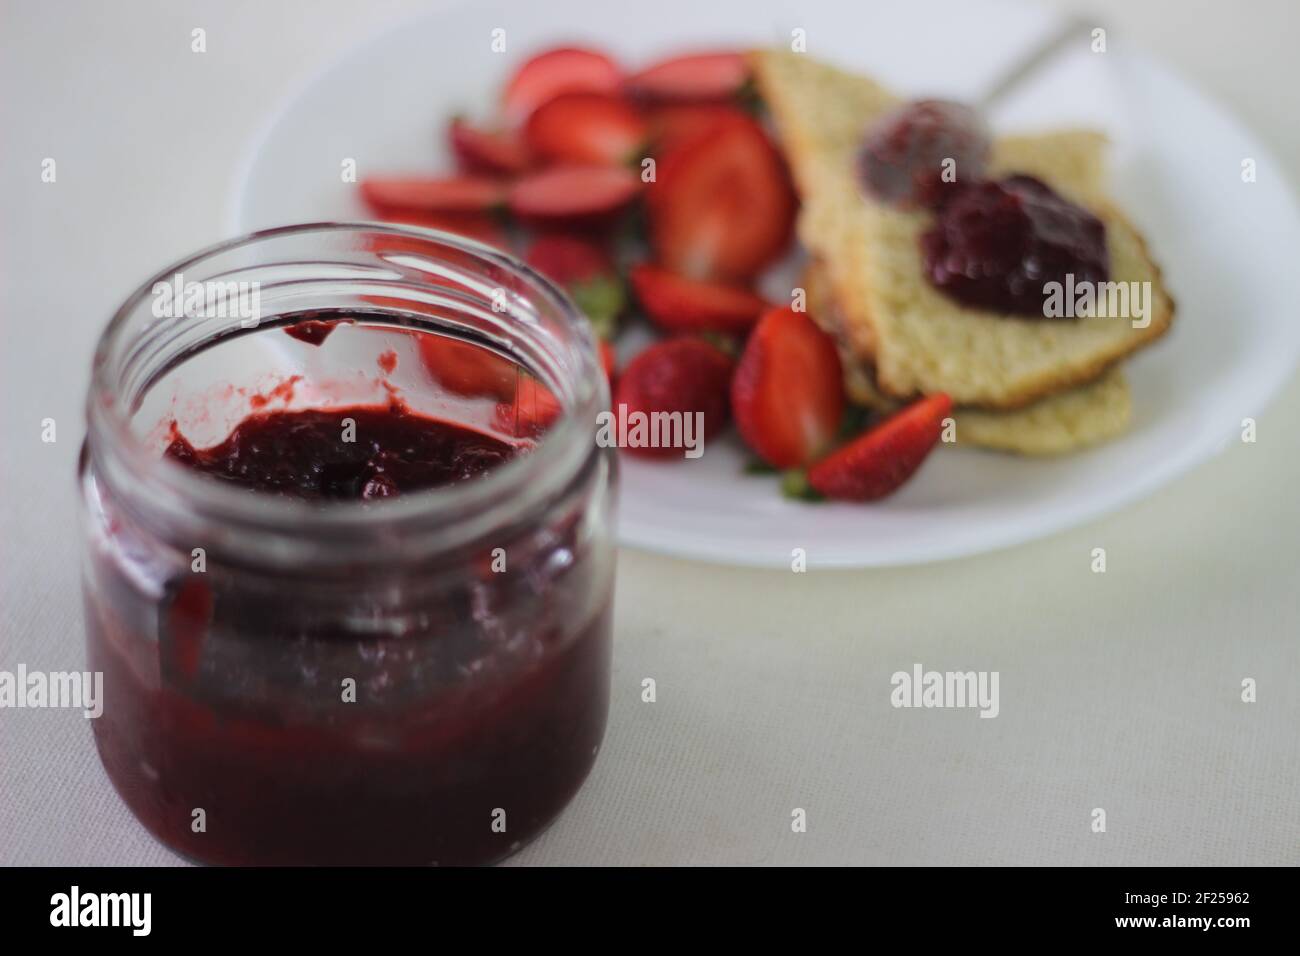 Half-full bottle with homemade strawberry jam shot along with home-baked plain mildly sweet buttermilk scones. Shot on white background Stock Photo